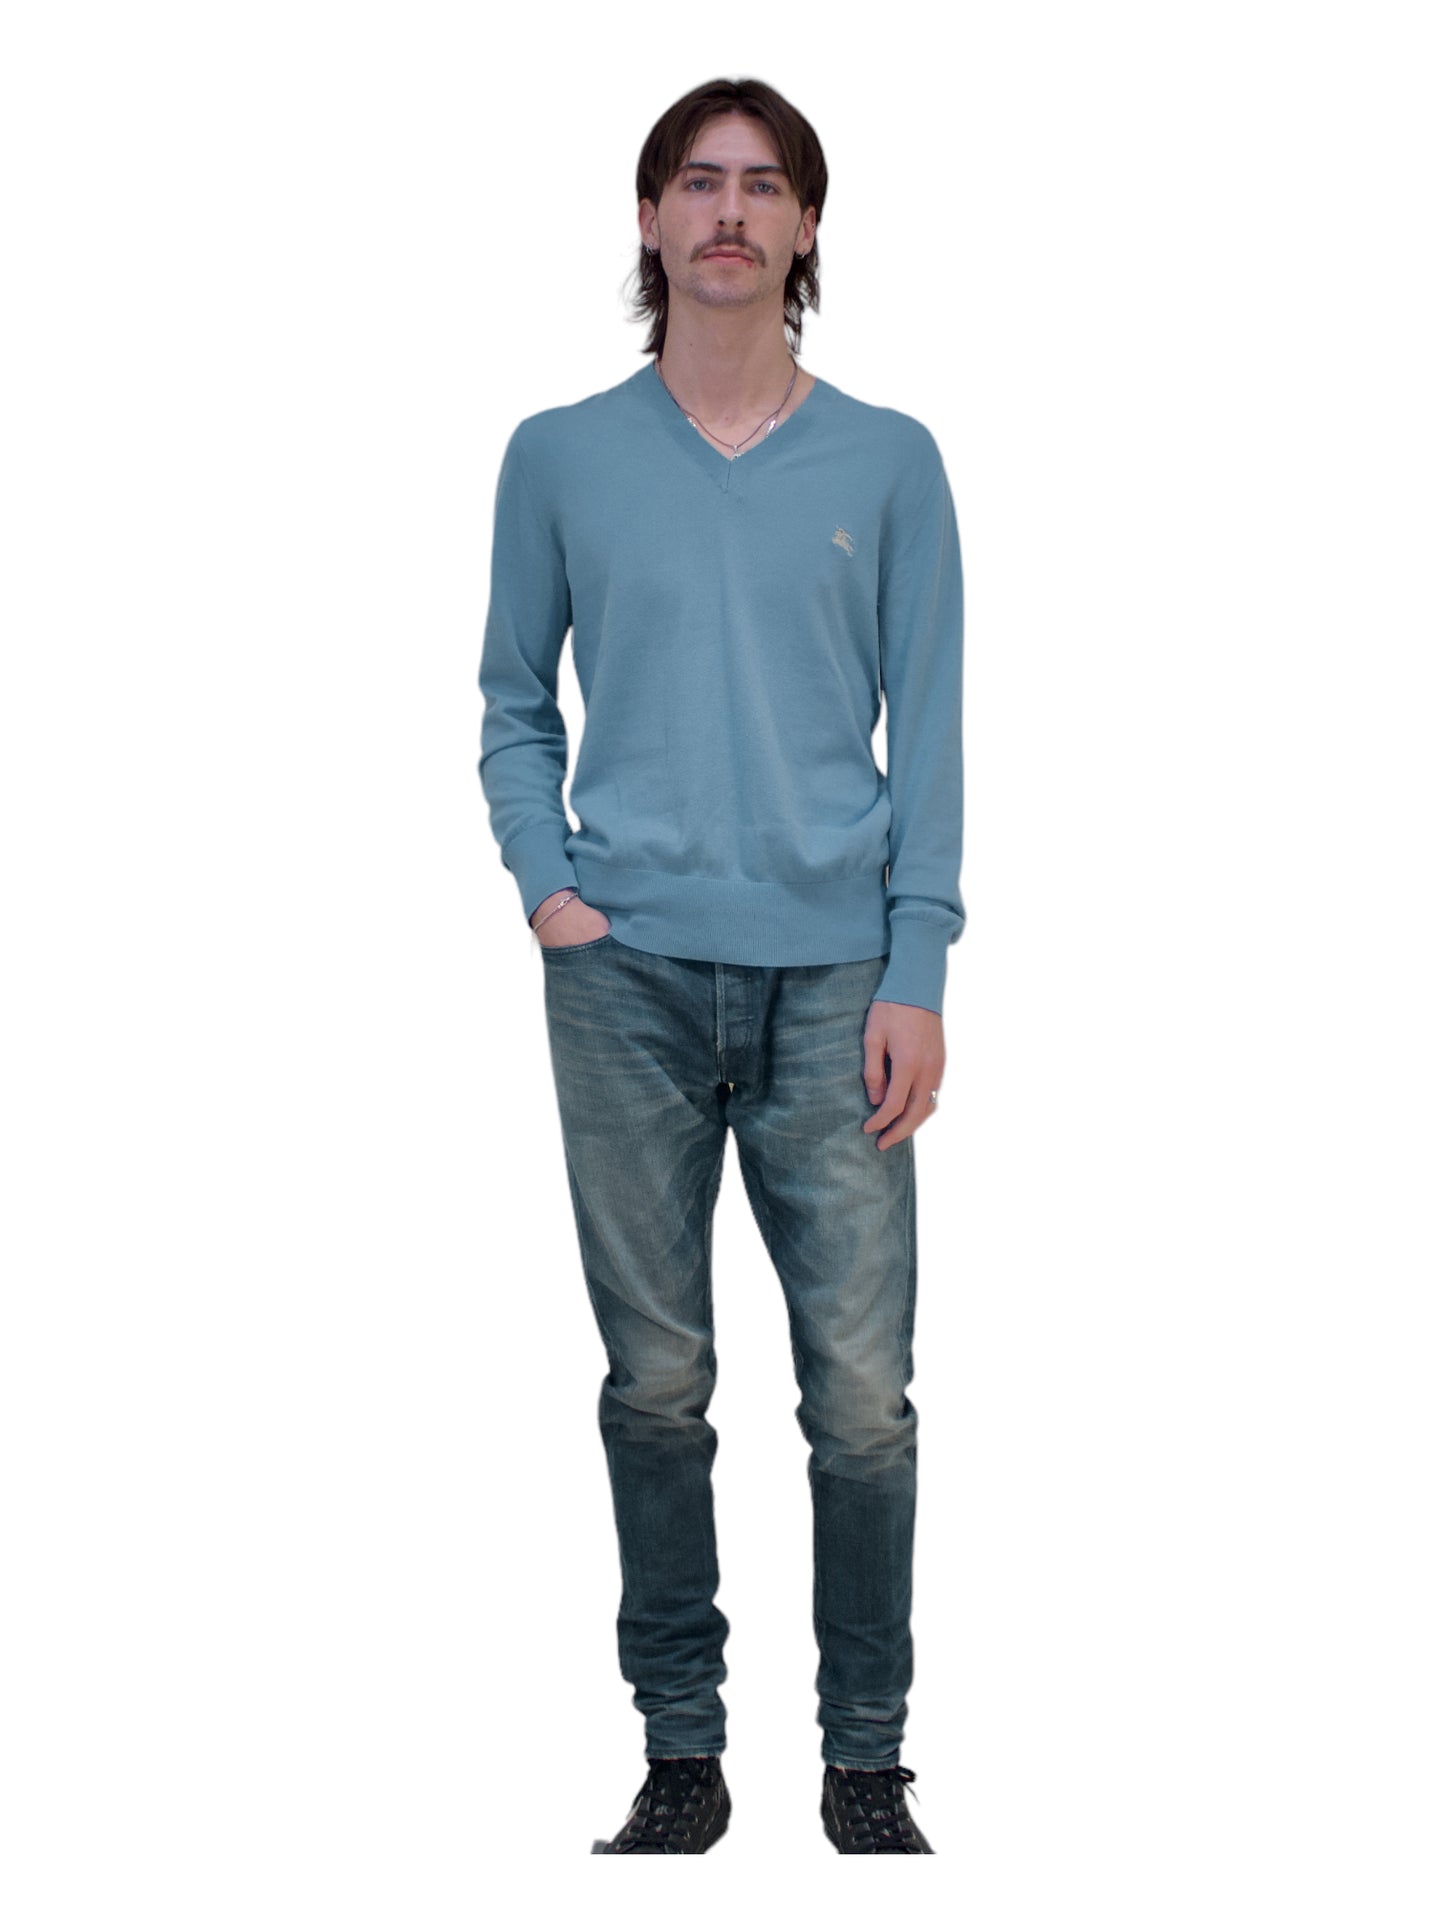 Burberry Light Blue Long Sleeve V-Neck Sweater - Genuine Design Luxury Consignment for Men. New & Pre-Owned Clothing, Shoes, & Accessories. Calgary, Canada